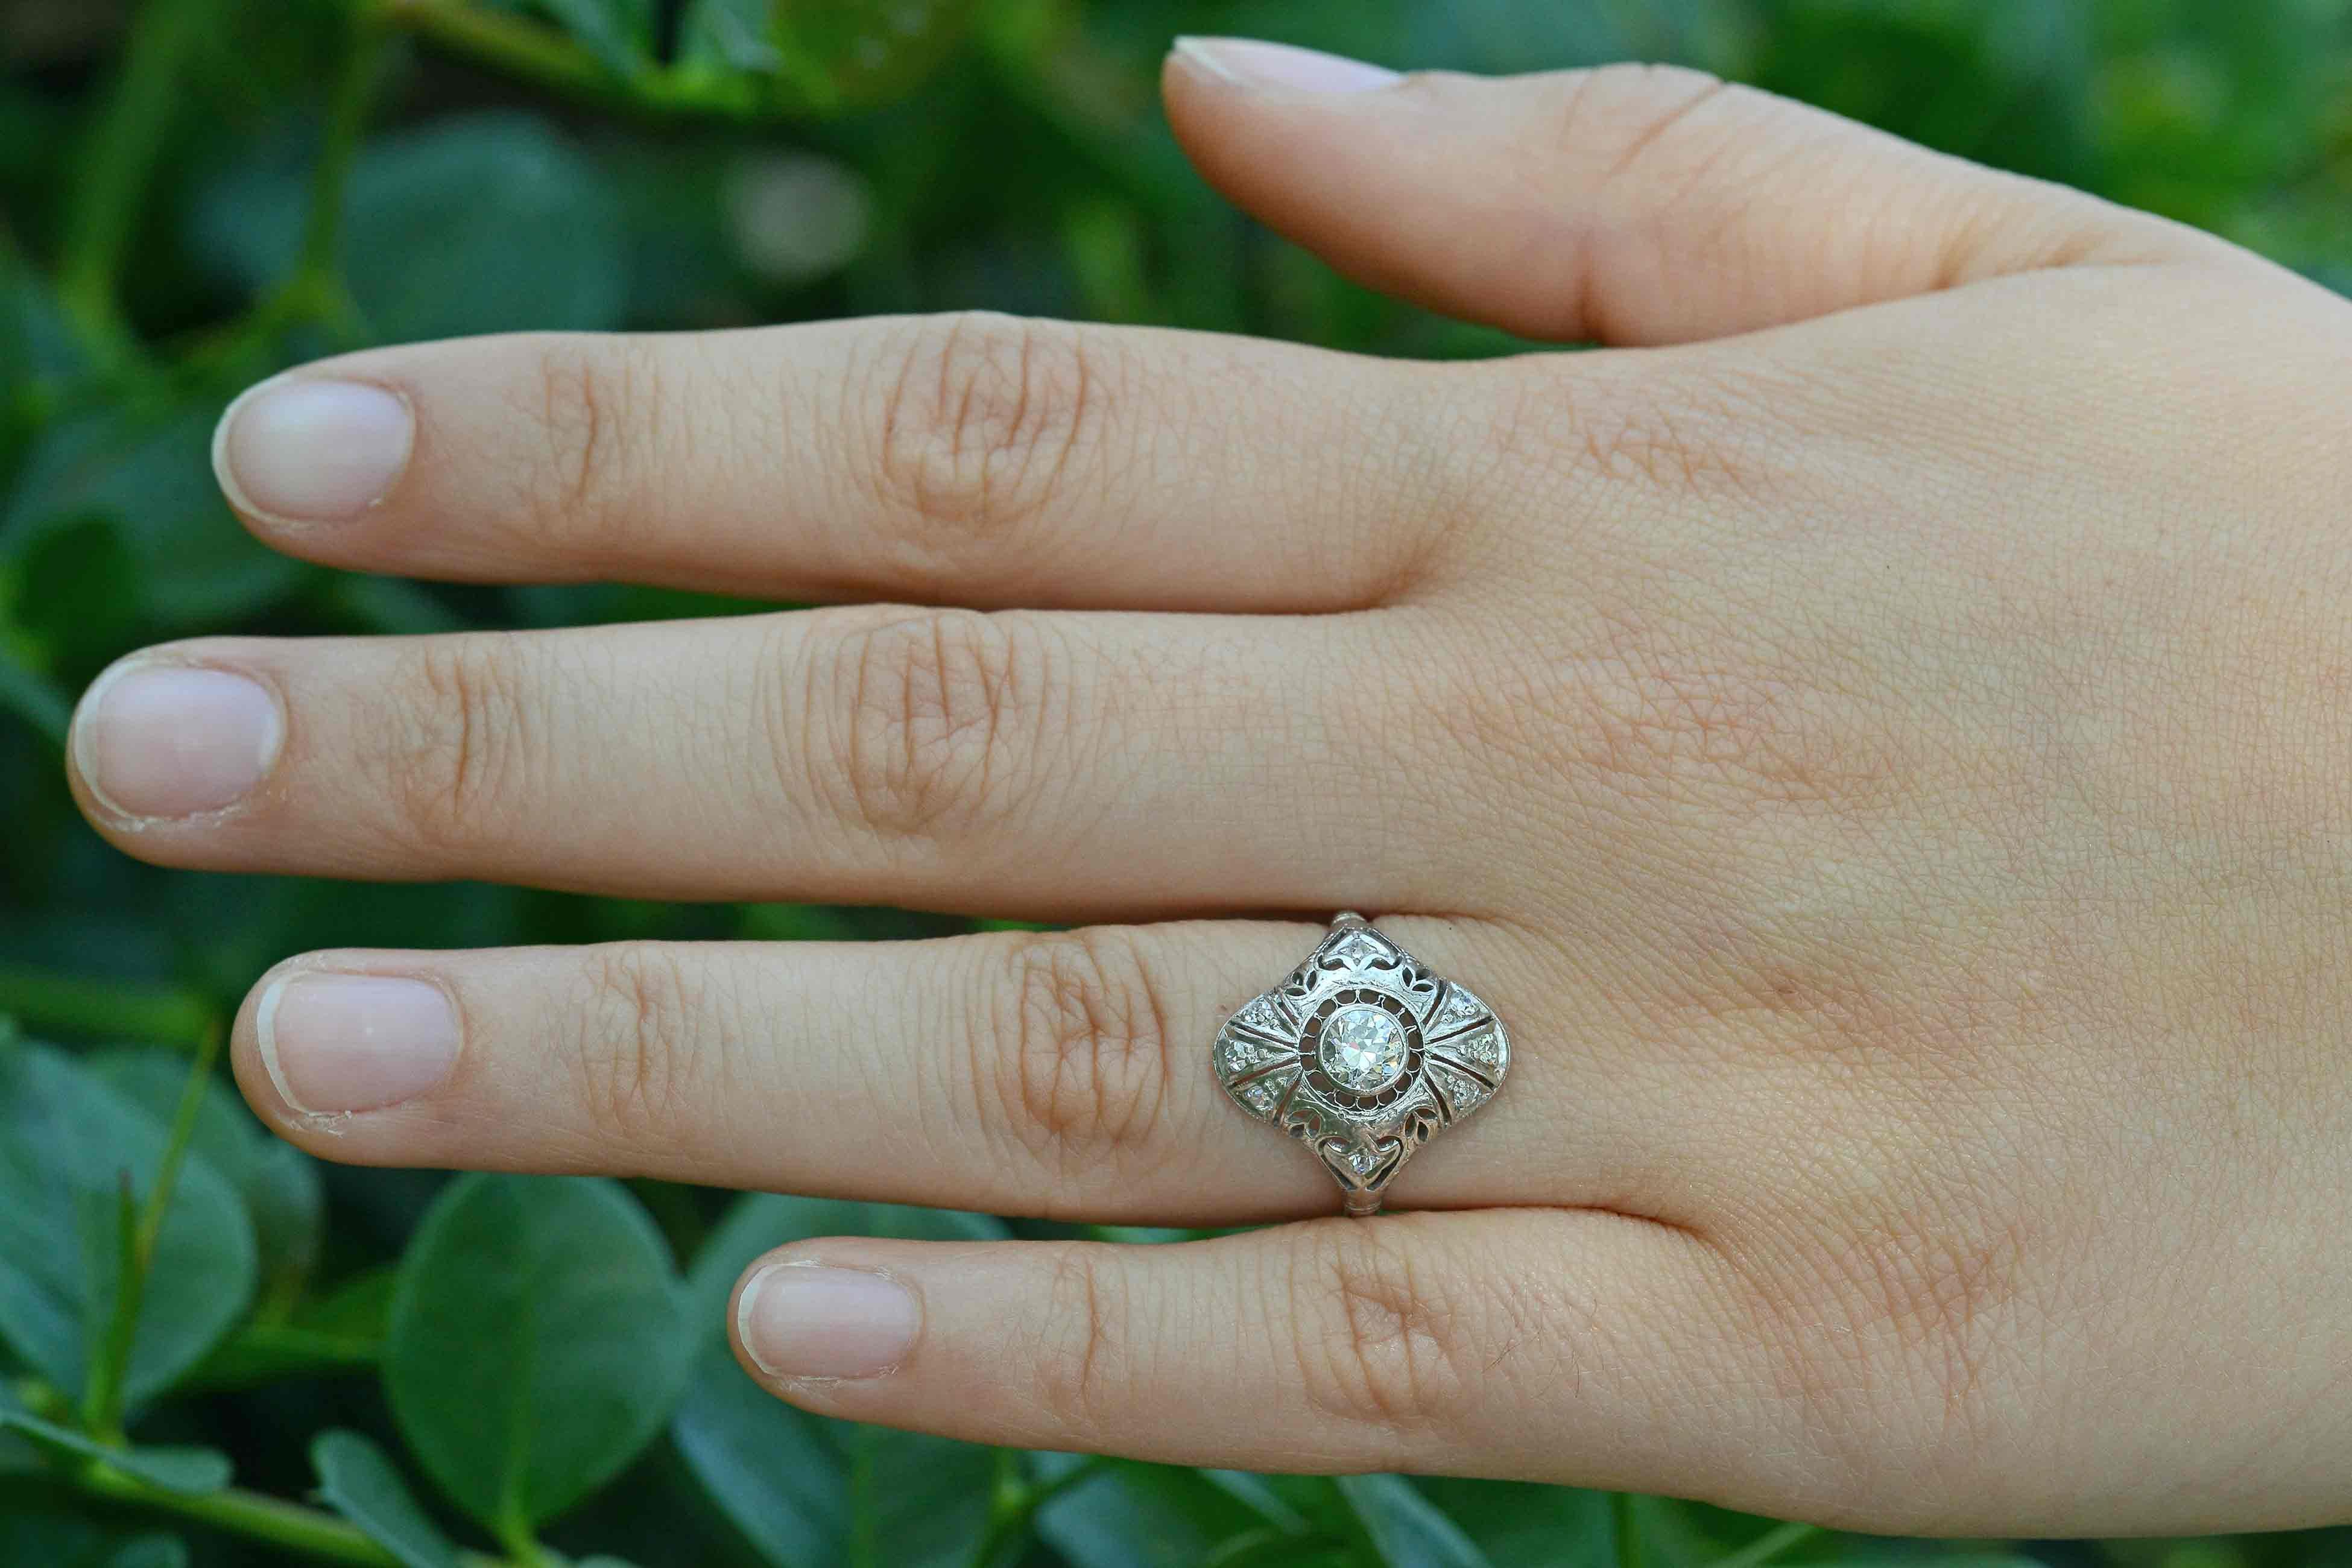 The Los Feliz vintage engagement ring. You will feel so elegant wearing this classic antique filigree ring. From it's captivating setting, set with a chunky, faceted old European diamond, the sexy, navette shape elongates the finger. Sitting low on